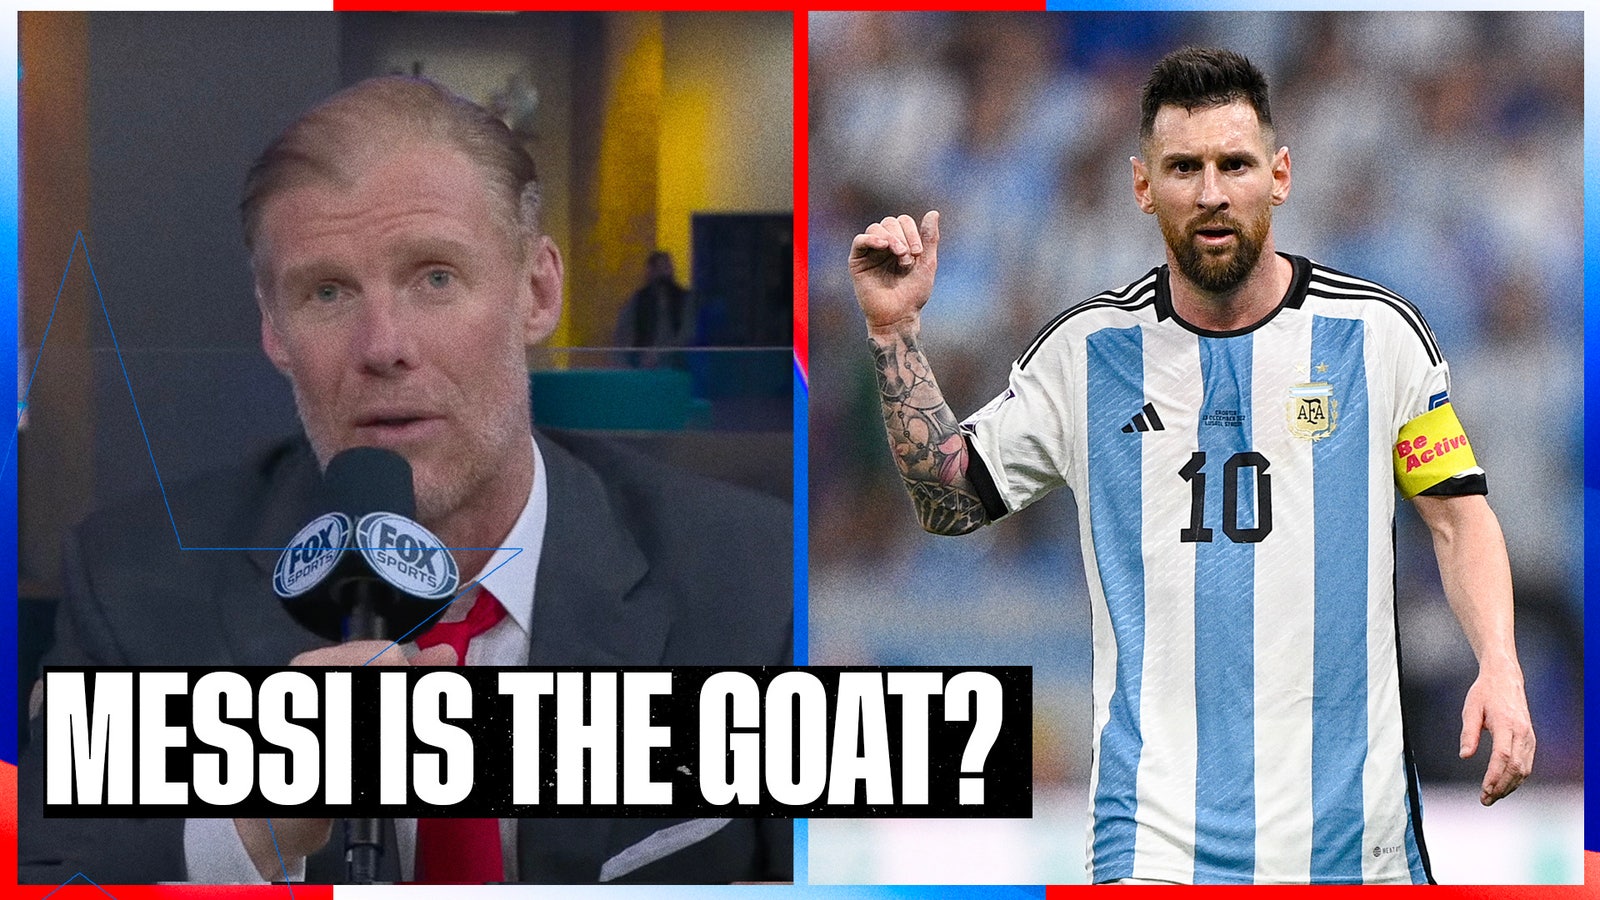 Has Lionel Messi Proved He's The GOAT?